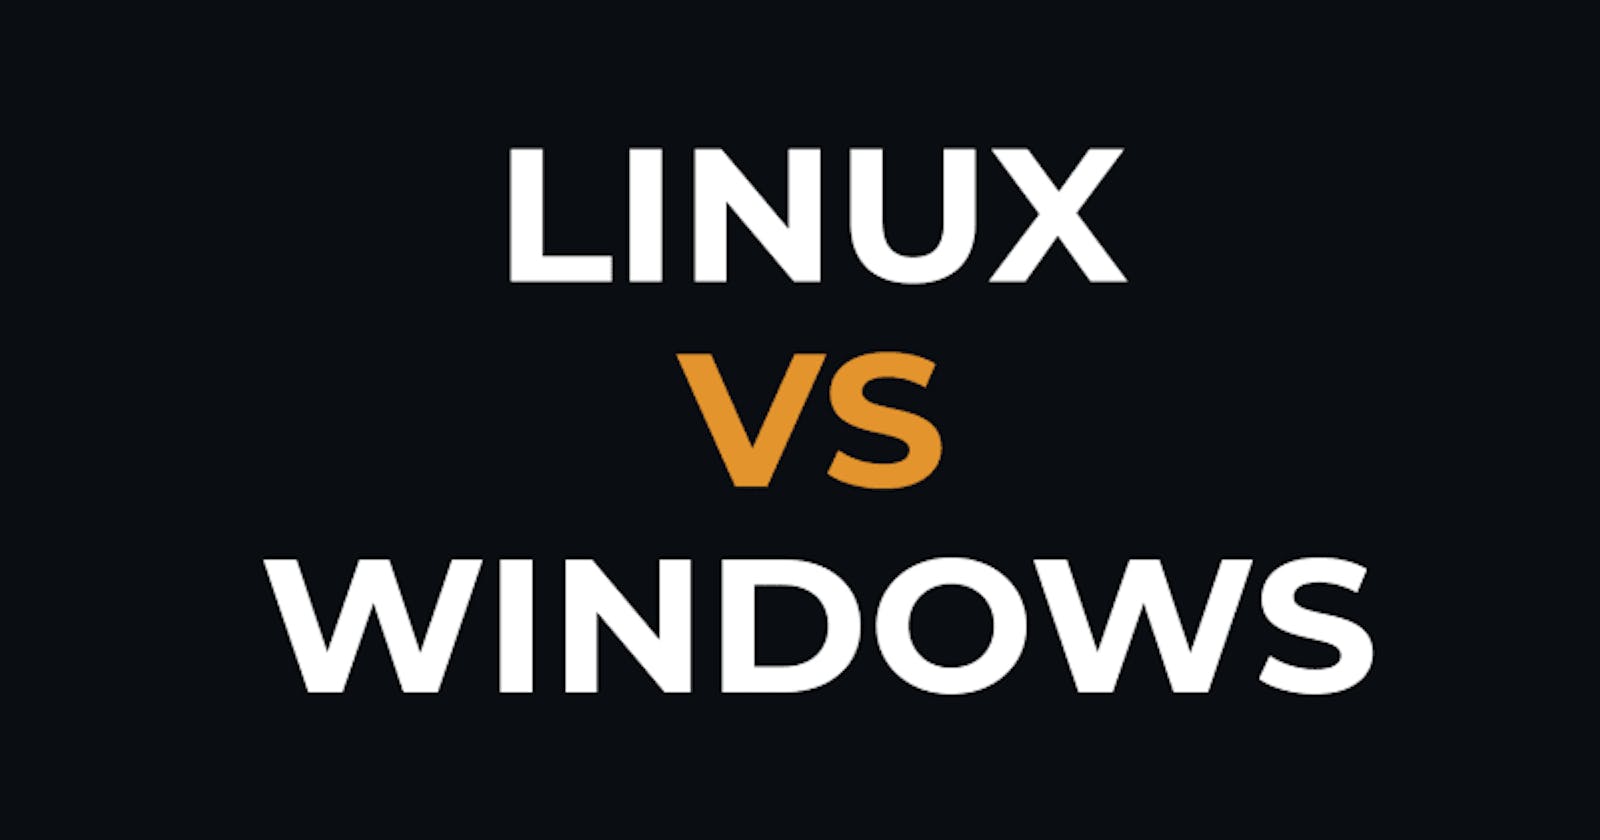 Why is Linux better for programming than Windows? Linux vs Windows